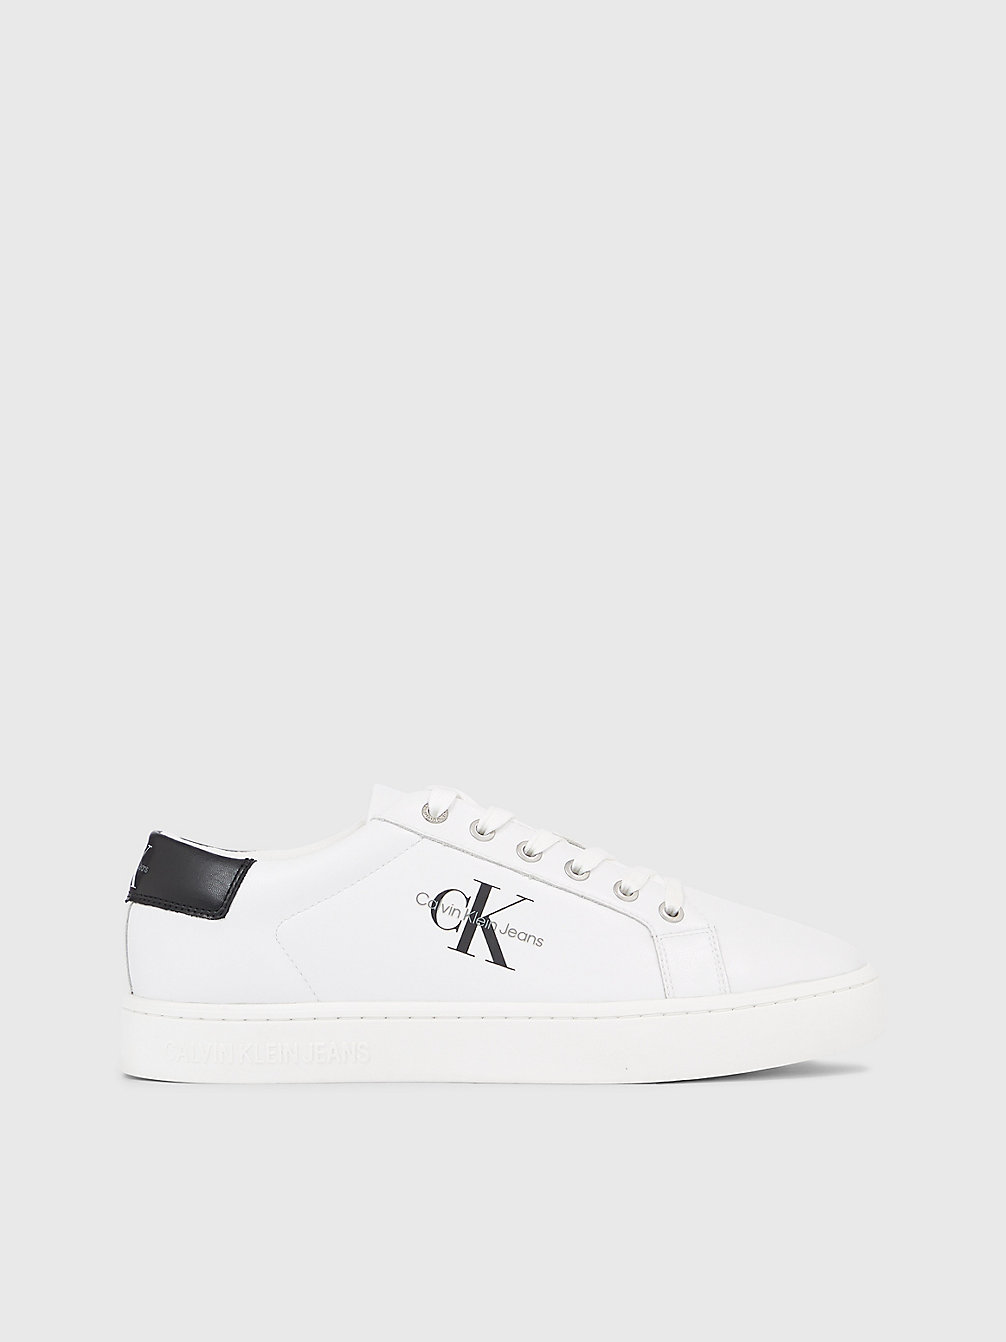 BRIGHT WHITE/BLACK Recycled Leather Trainers undefined men Calvin Klein